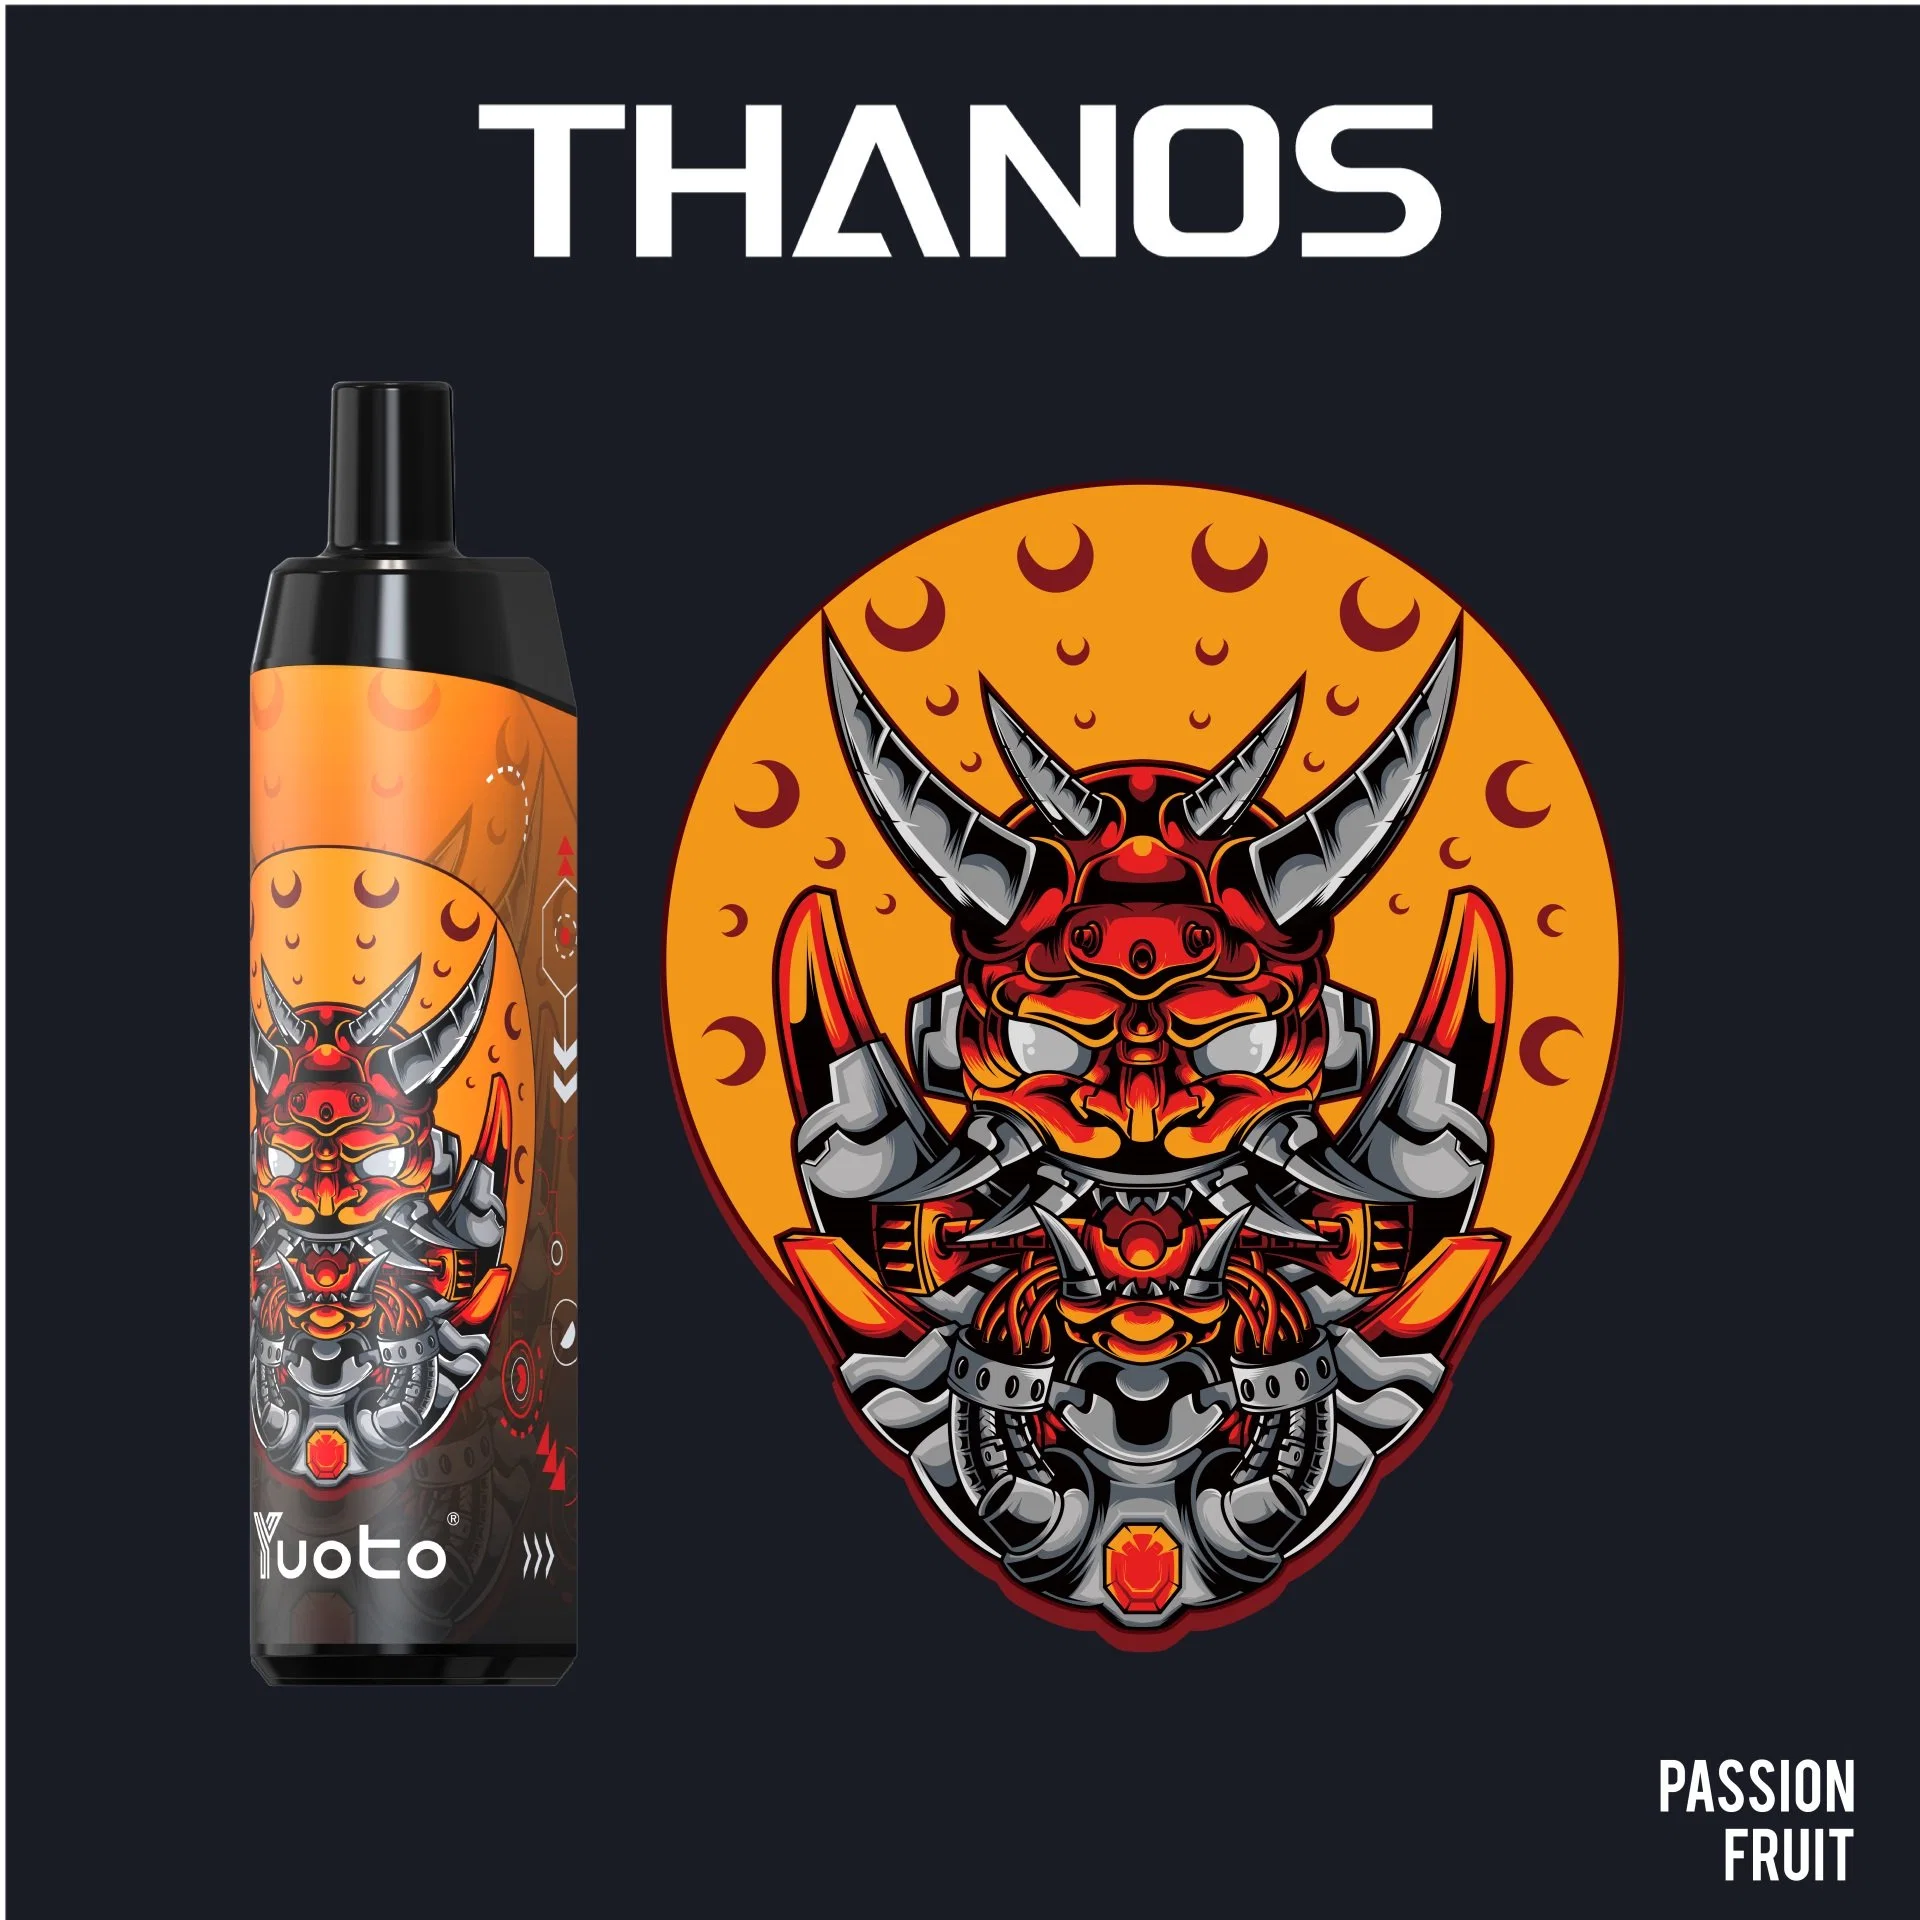 650mAh Battery 20 Hot Flavors Fast Shipping in Stock America UK Spain Russia Yuoto Thanos 5000puffs Disposable Vapes